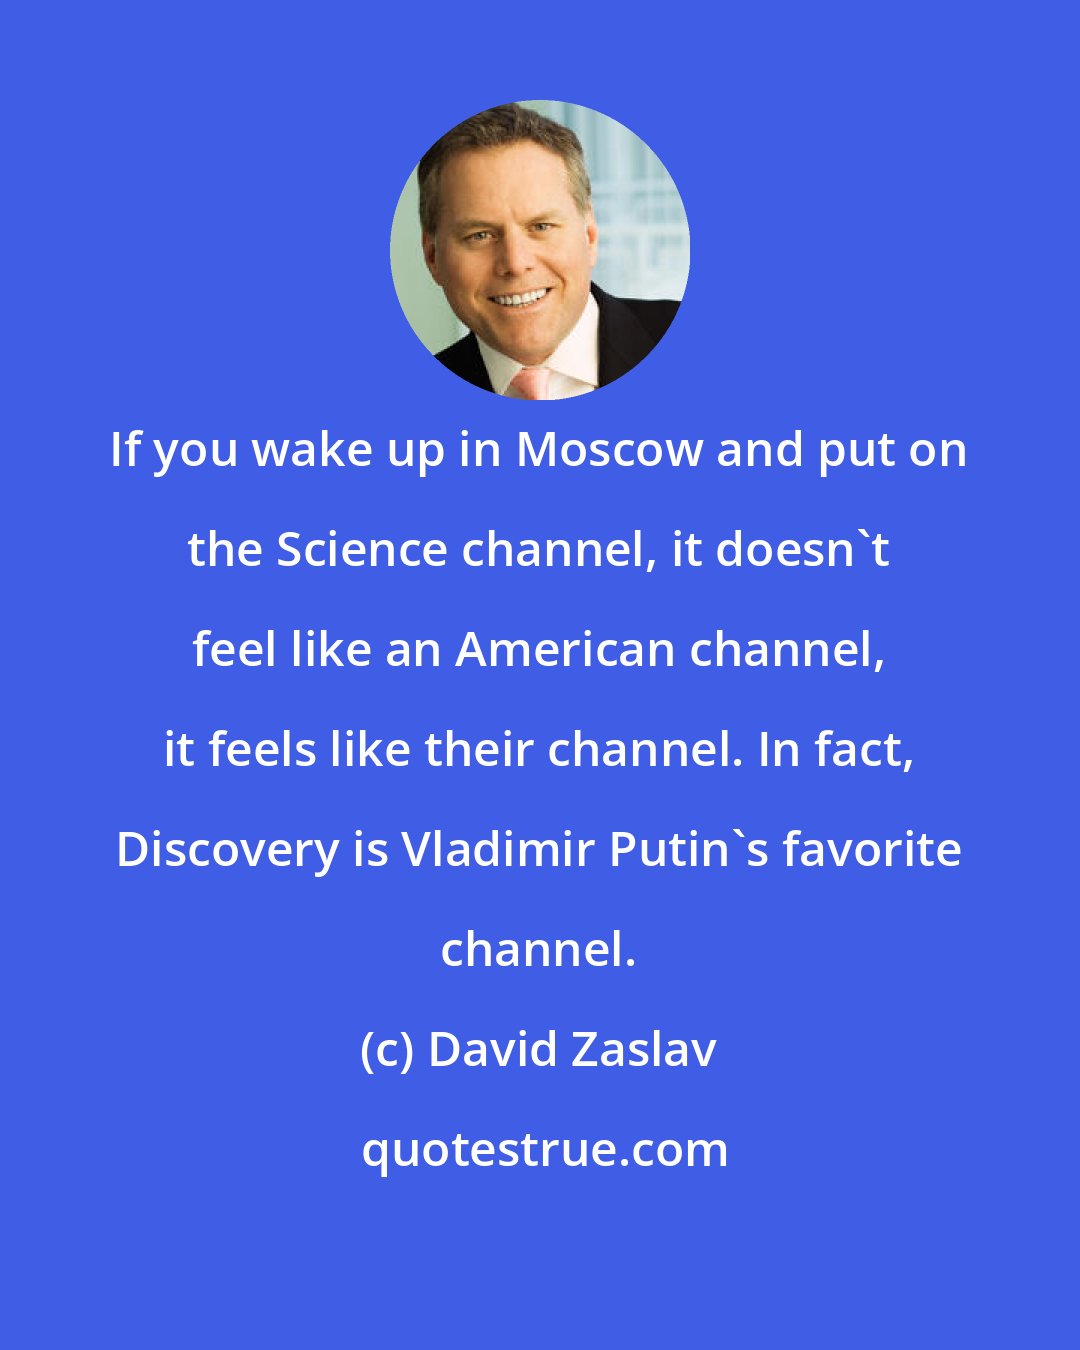 David Zaslav: If you wake up in Moscow and put on the Science channel, it doesn't feel like an American channel, it feels like their channel. In fact, Discovery is Vladimir Putin's favorite channel.